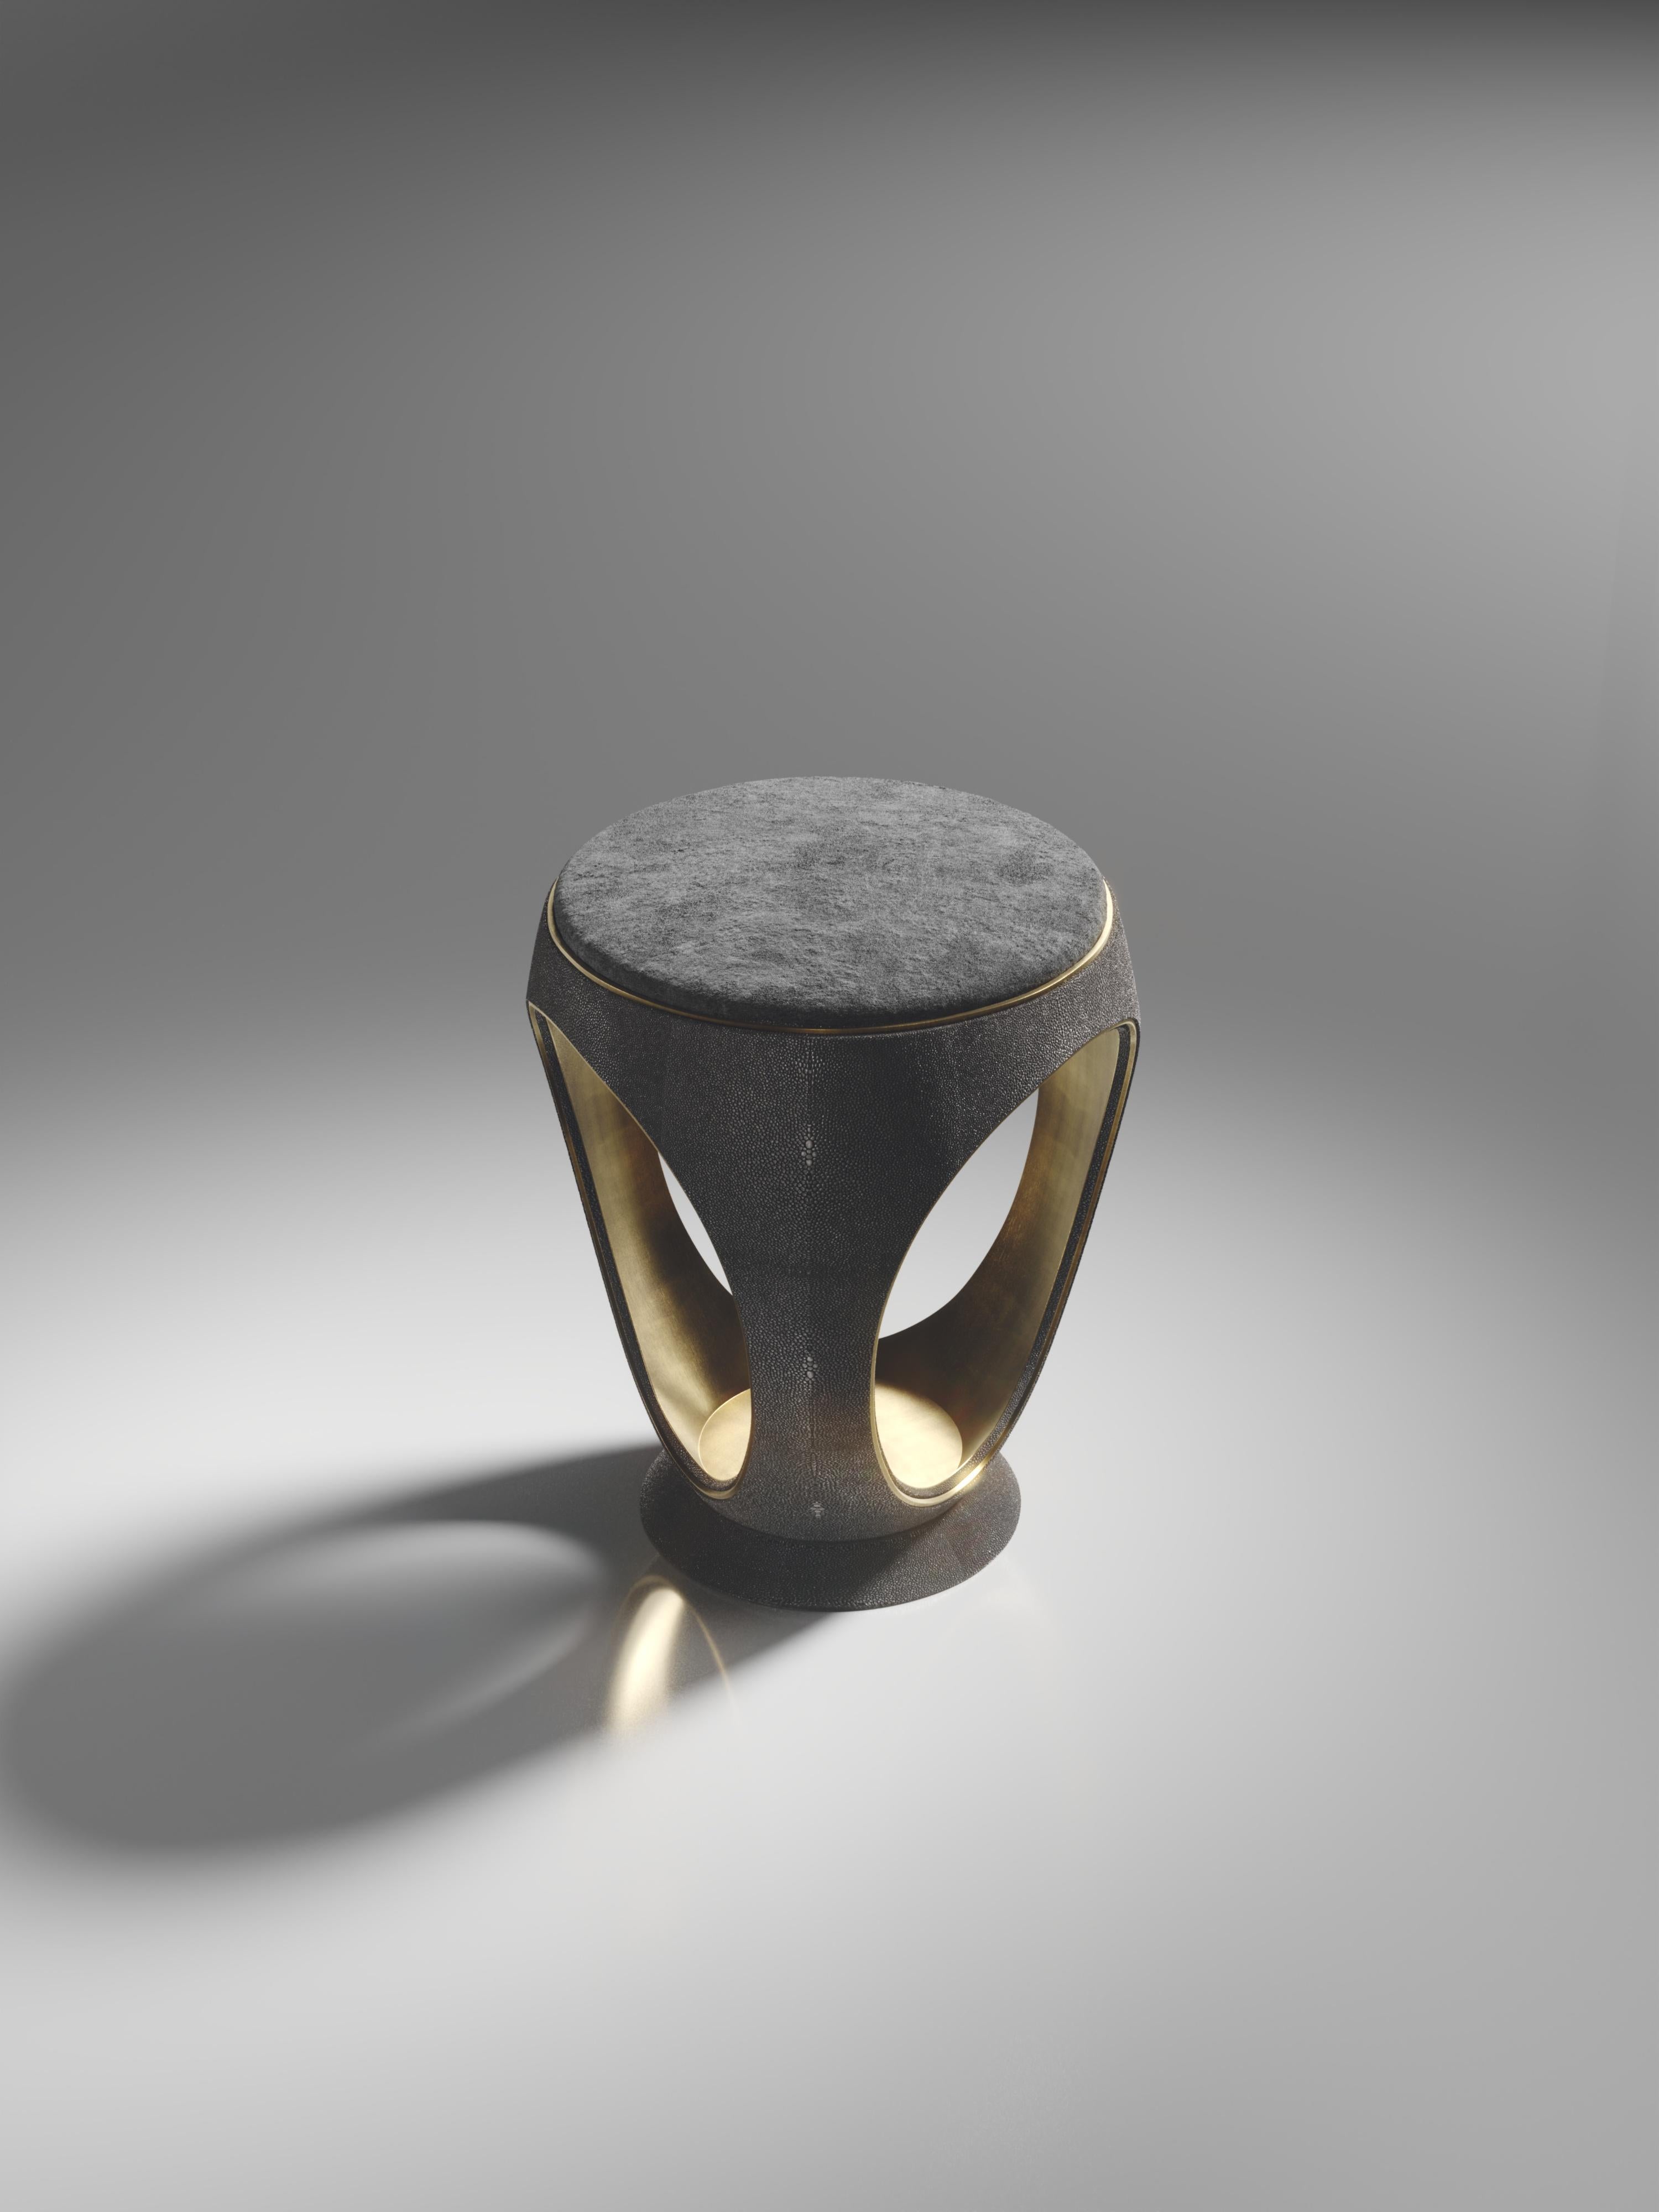 The ring stool in black shagreen is one of the most iconic pieces of the R&Y Augousti Collection. A Sculptural, jewel-like shape, this piece has been revamped with a discreet bronze-patina brass indentation detail on the exterior, as well as the